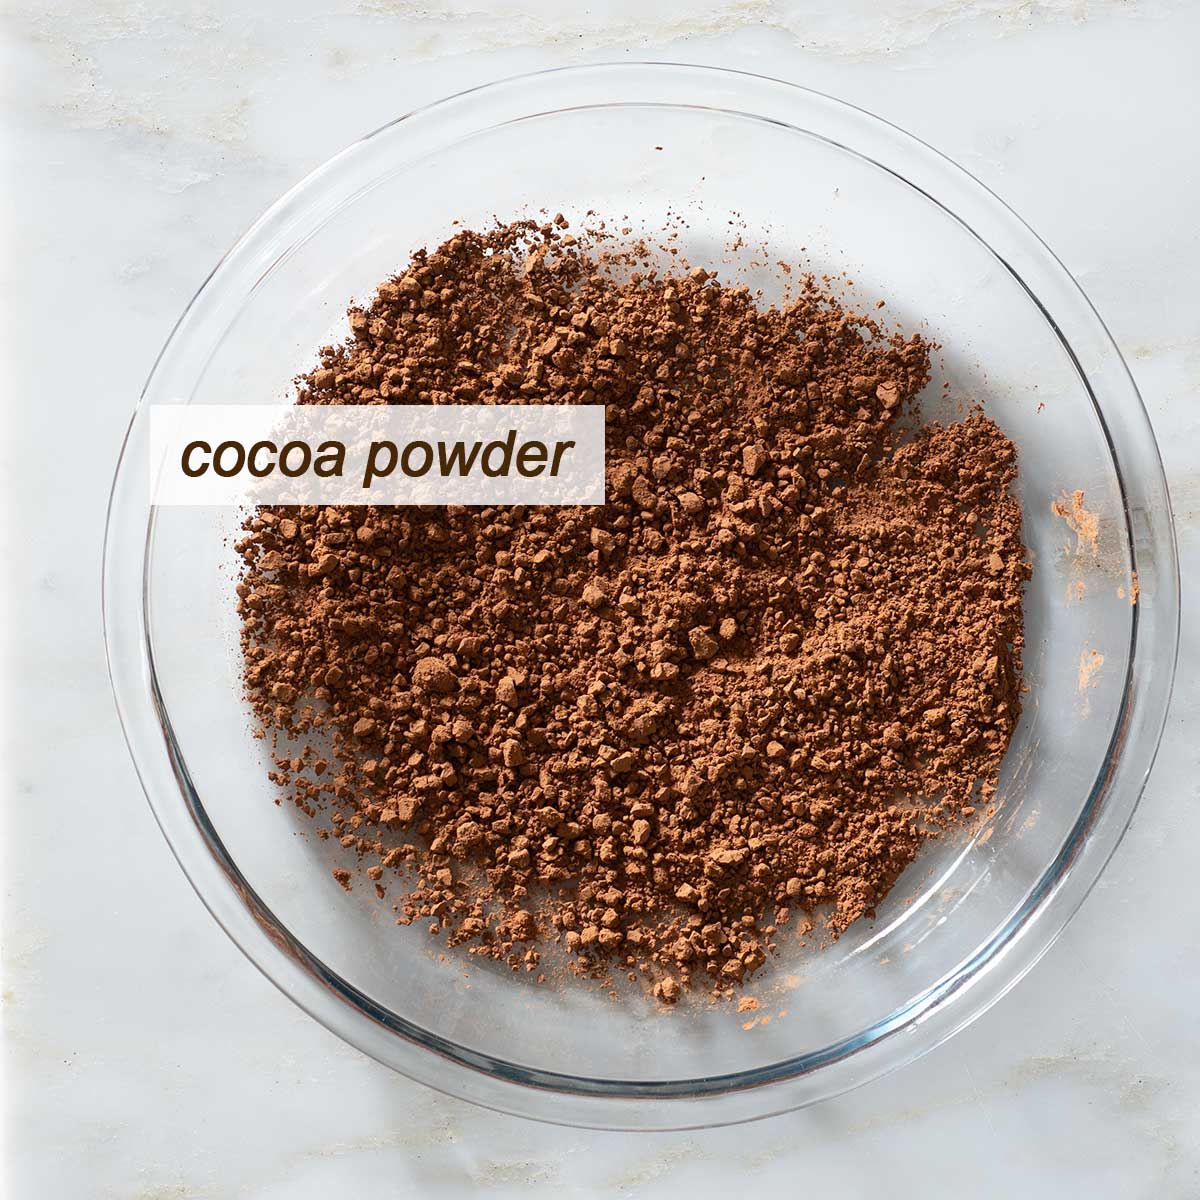 Cocoa powder on a glass plate.